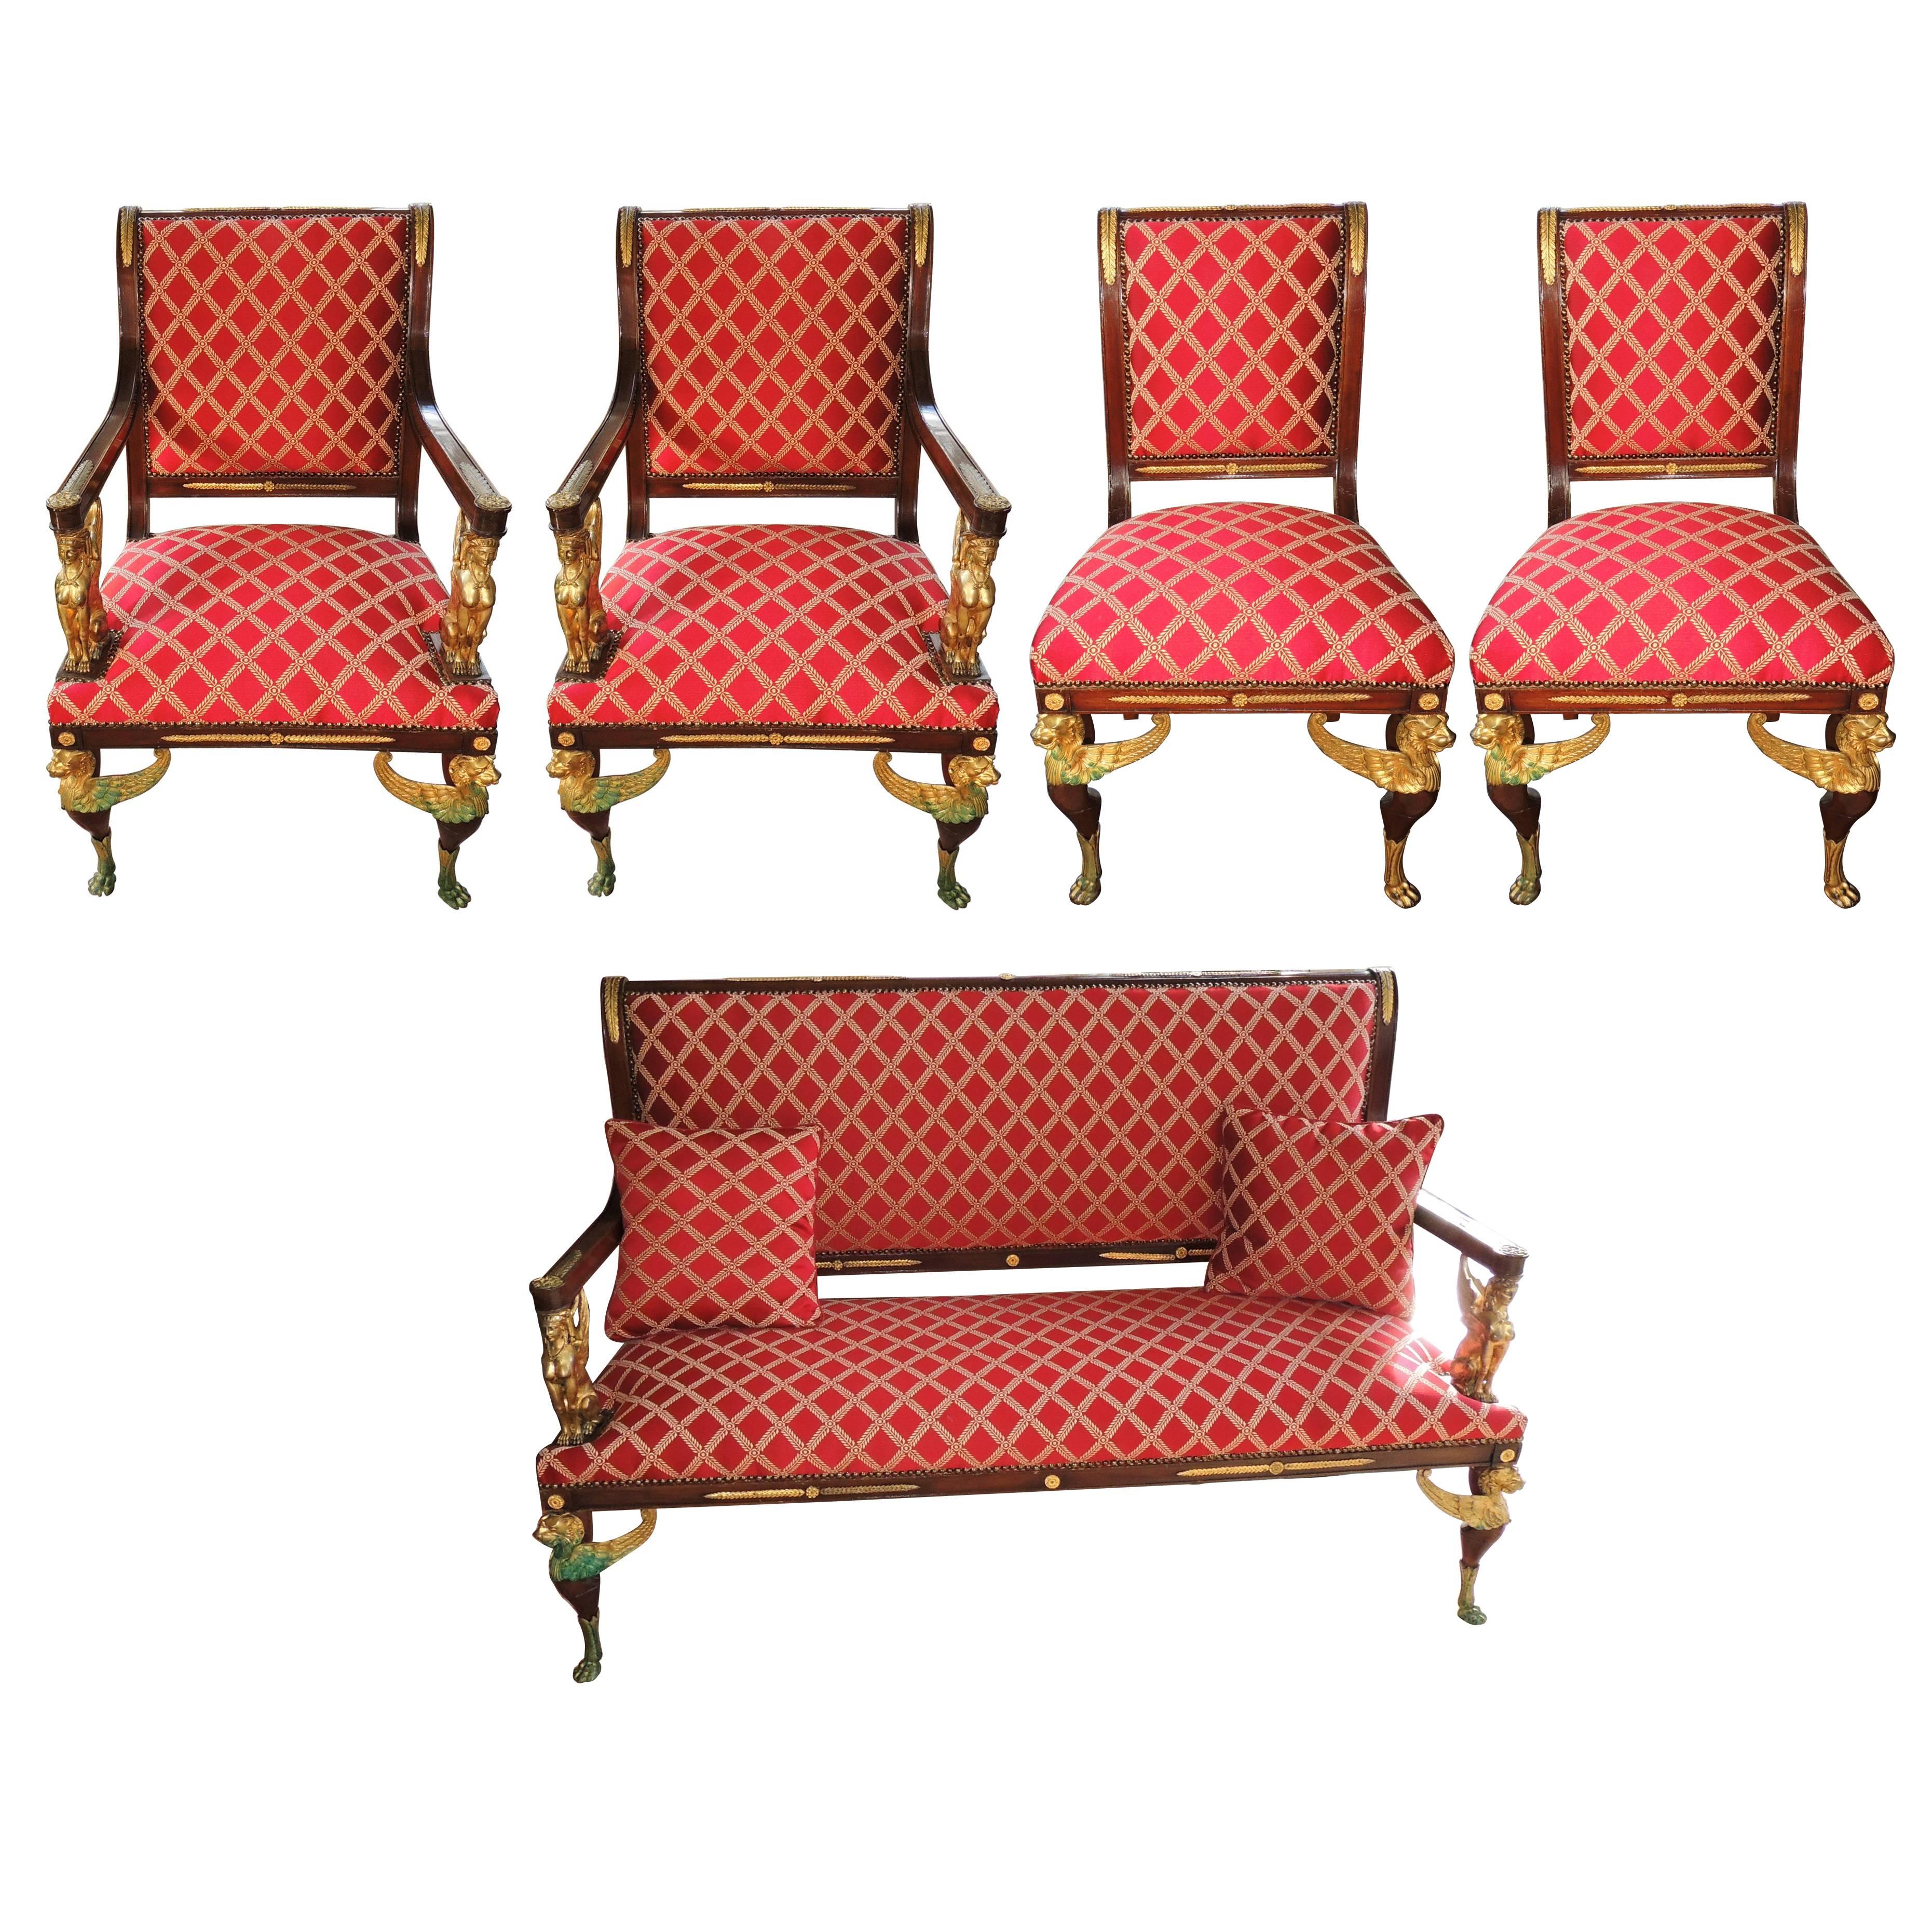 French Empire Parlour Set of Five-Piece Ormolu Bronze Armchairs Couch Settee